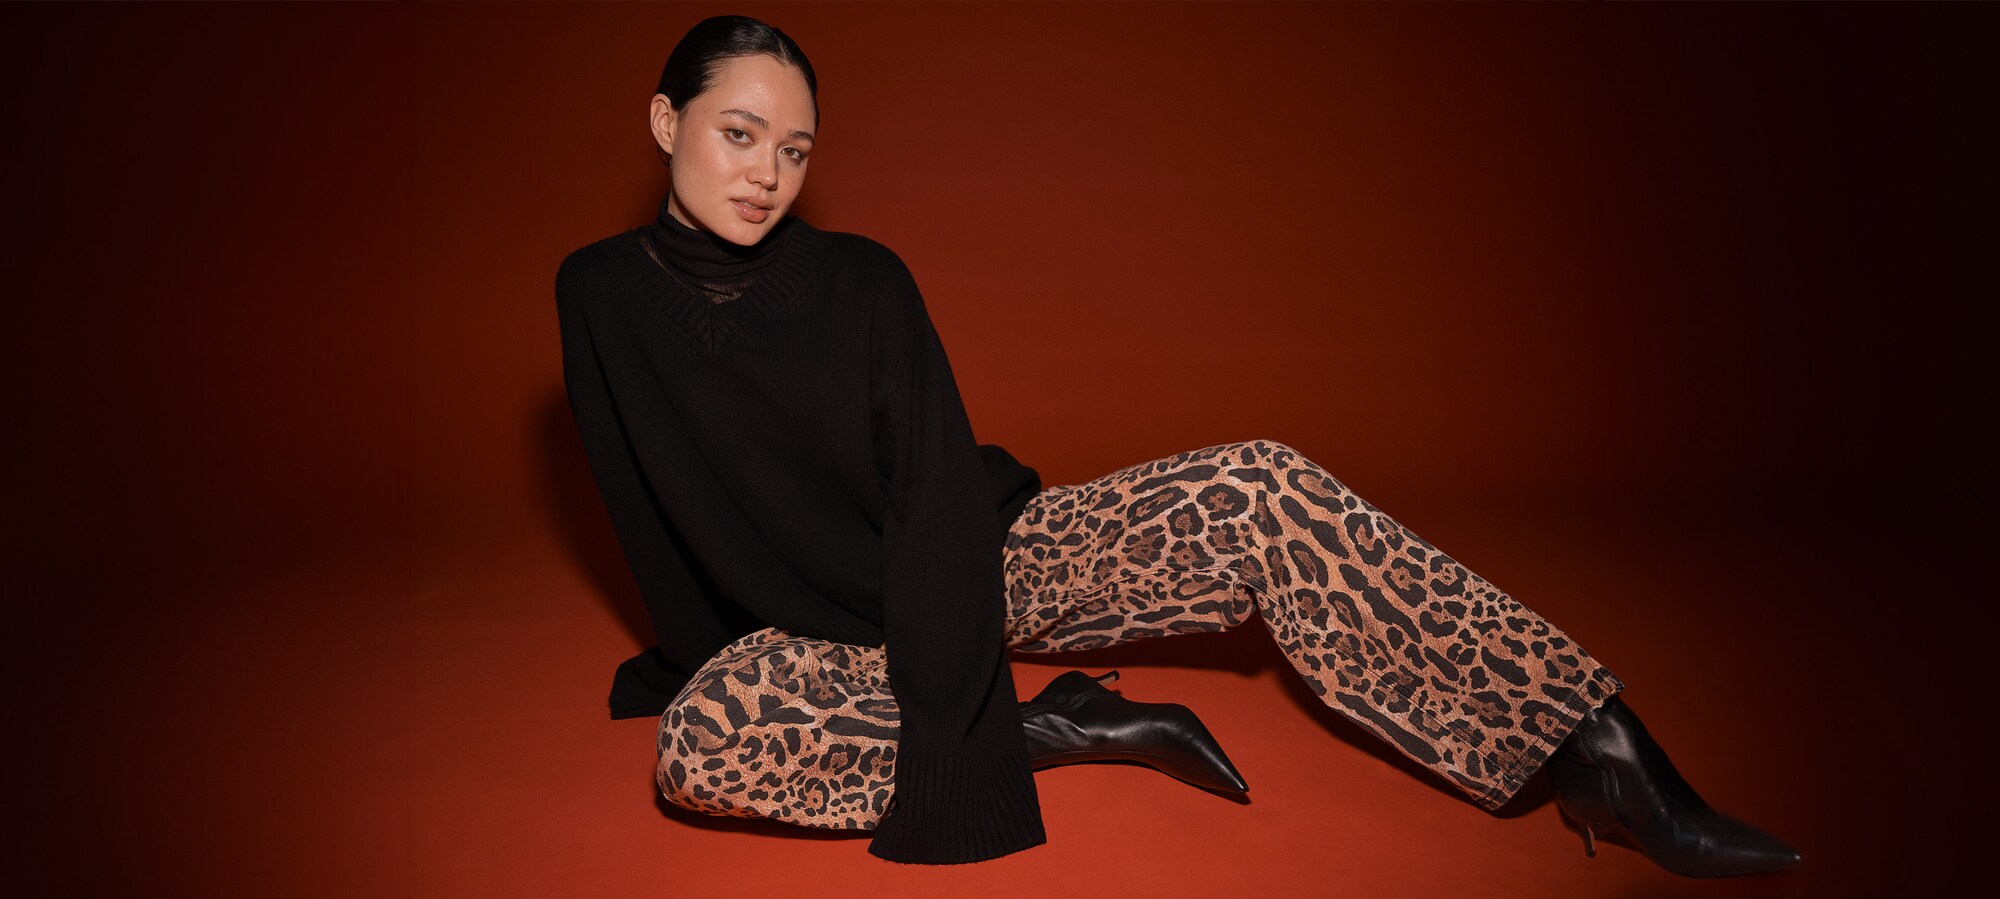 Master the trend How to style leopard print